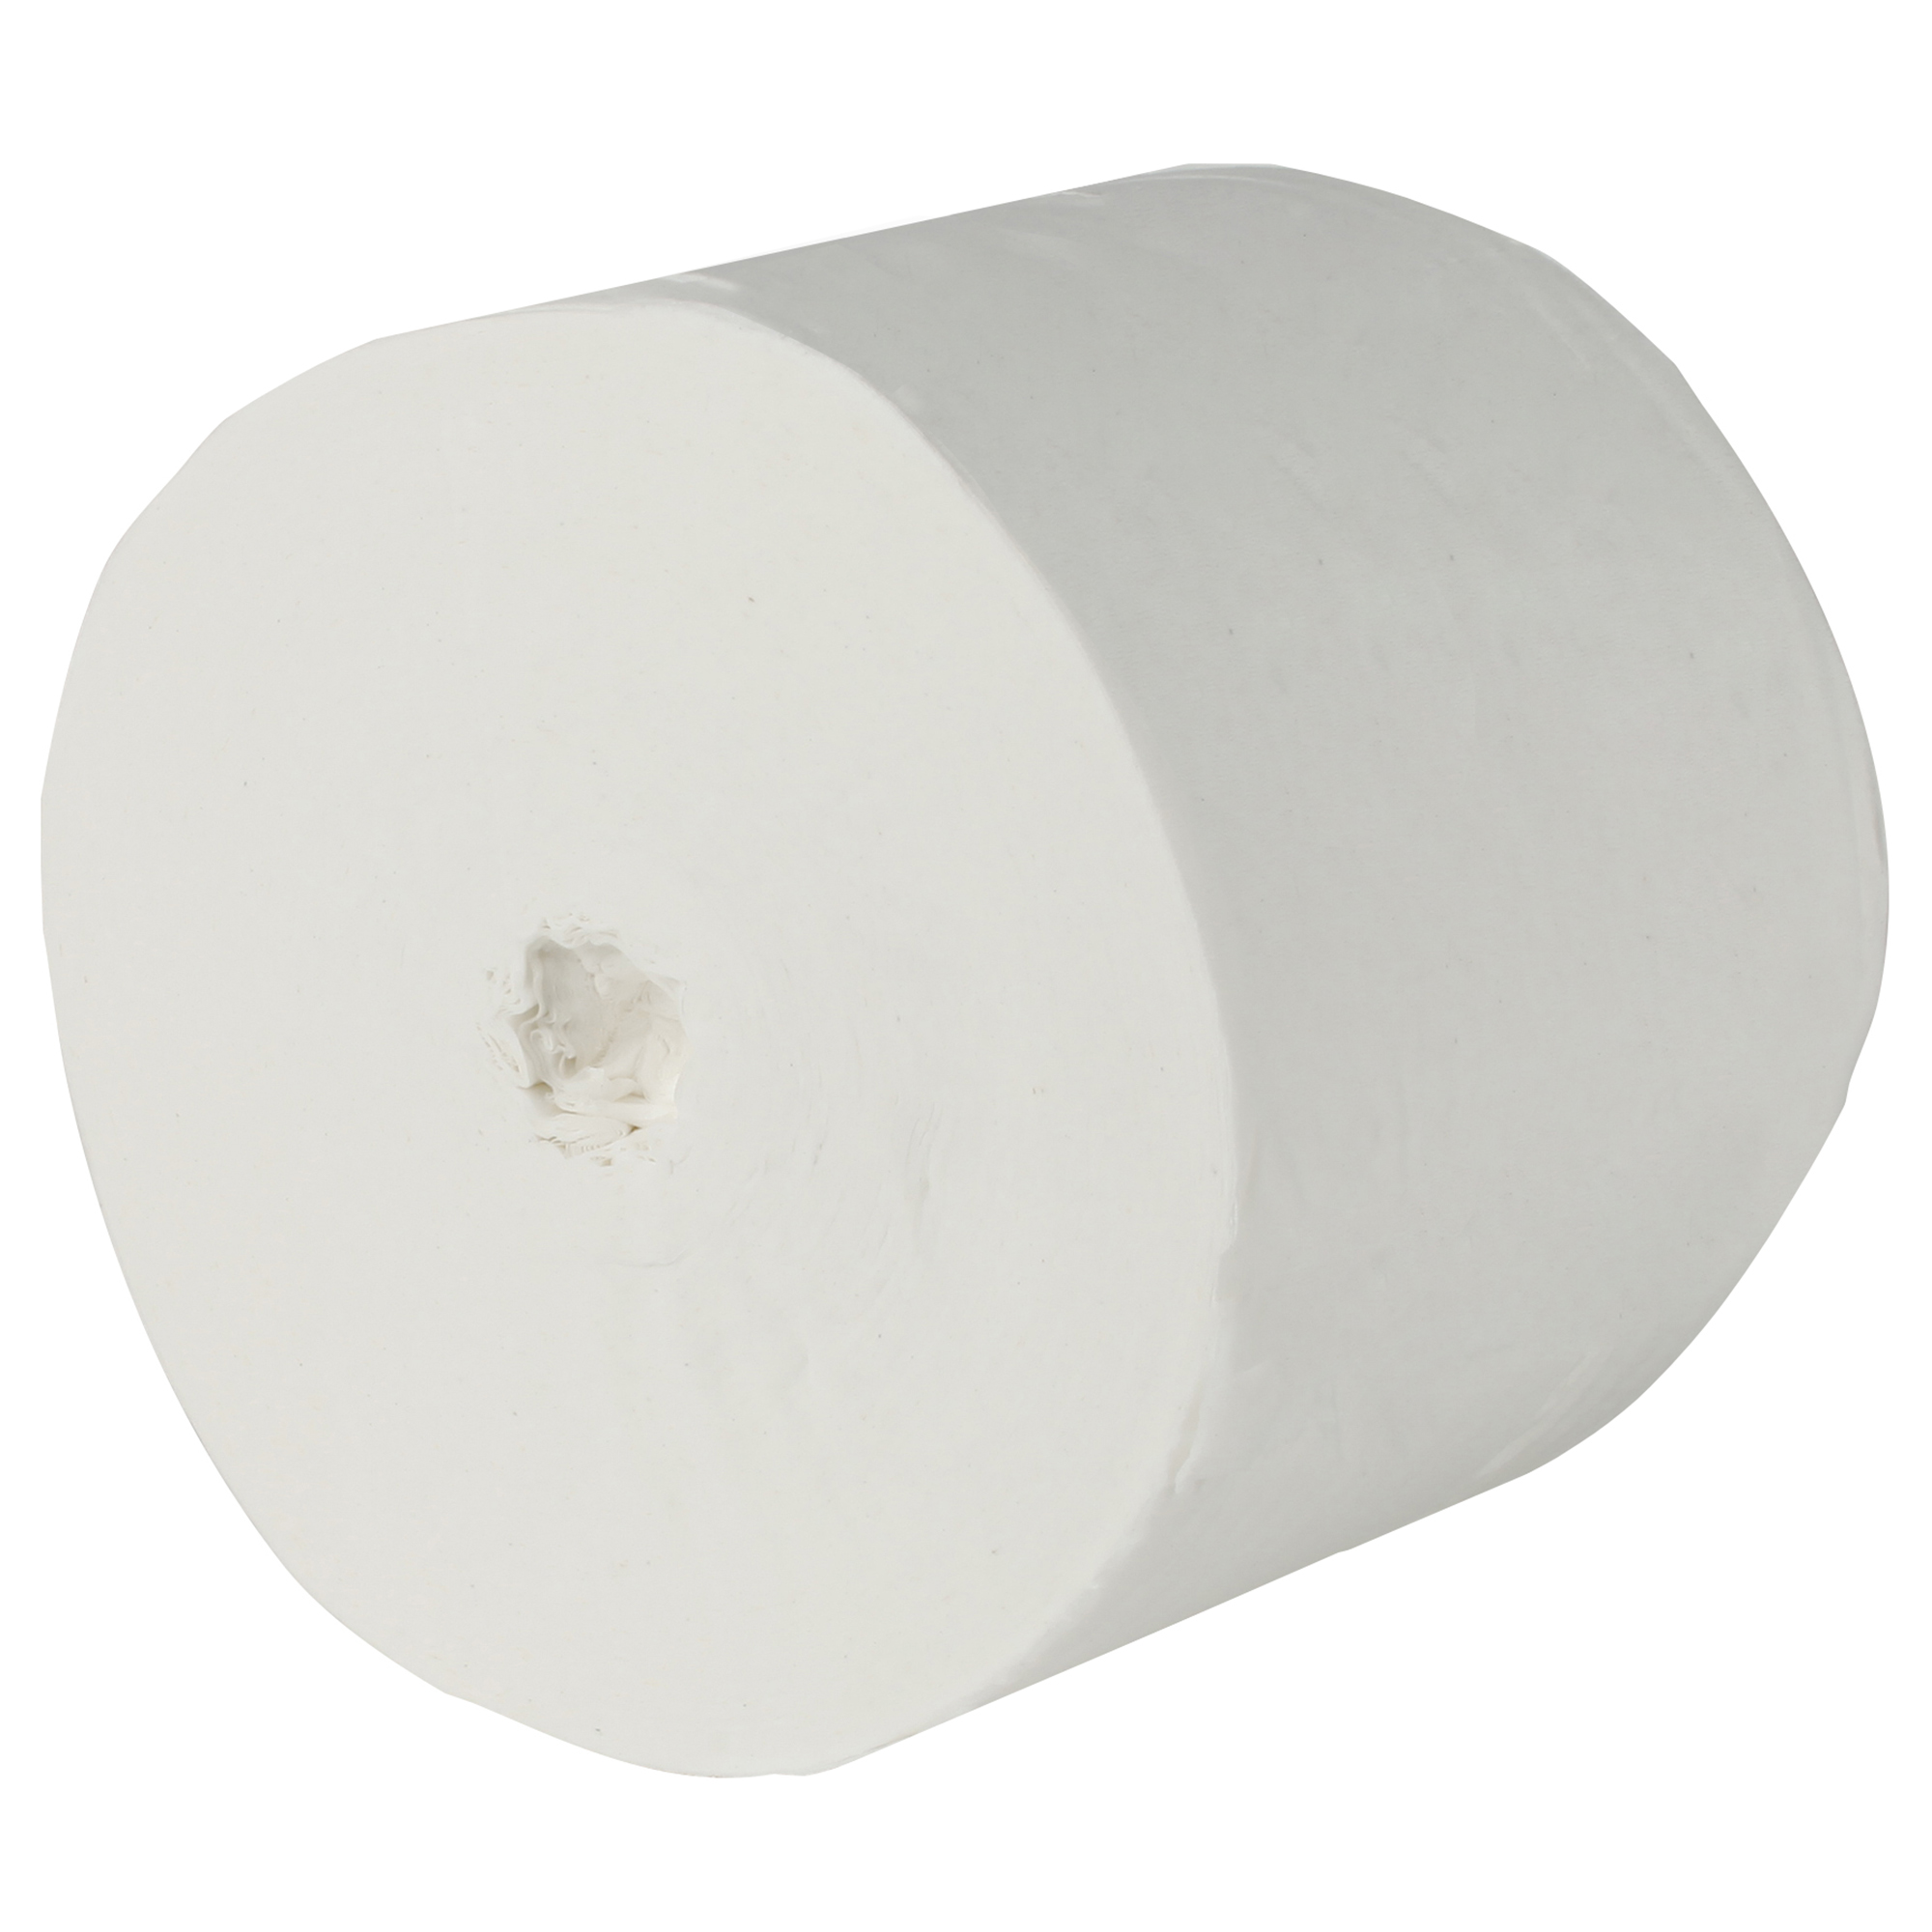 Picture of Essential Extra Soft Coreless Standard Roll Toilet Tissue, Two-Ply, 36 Rolls/Ct, 800 Sheets per roll